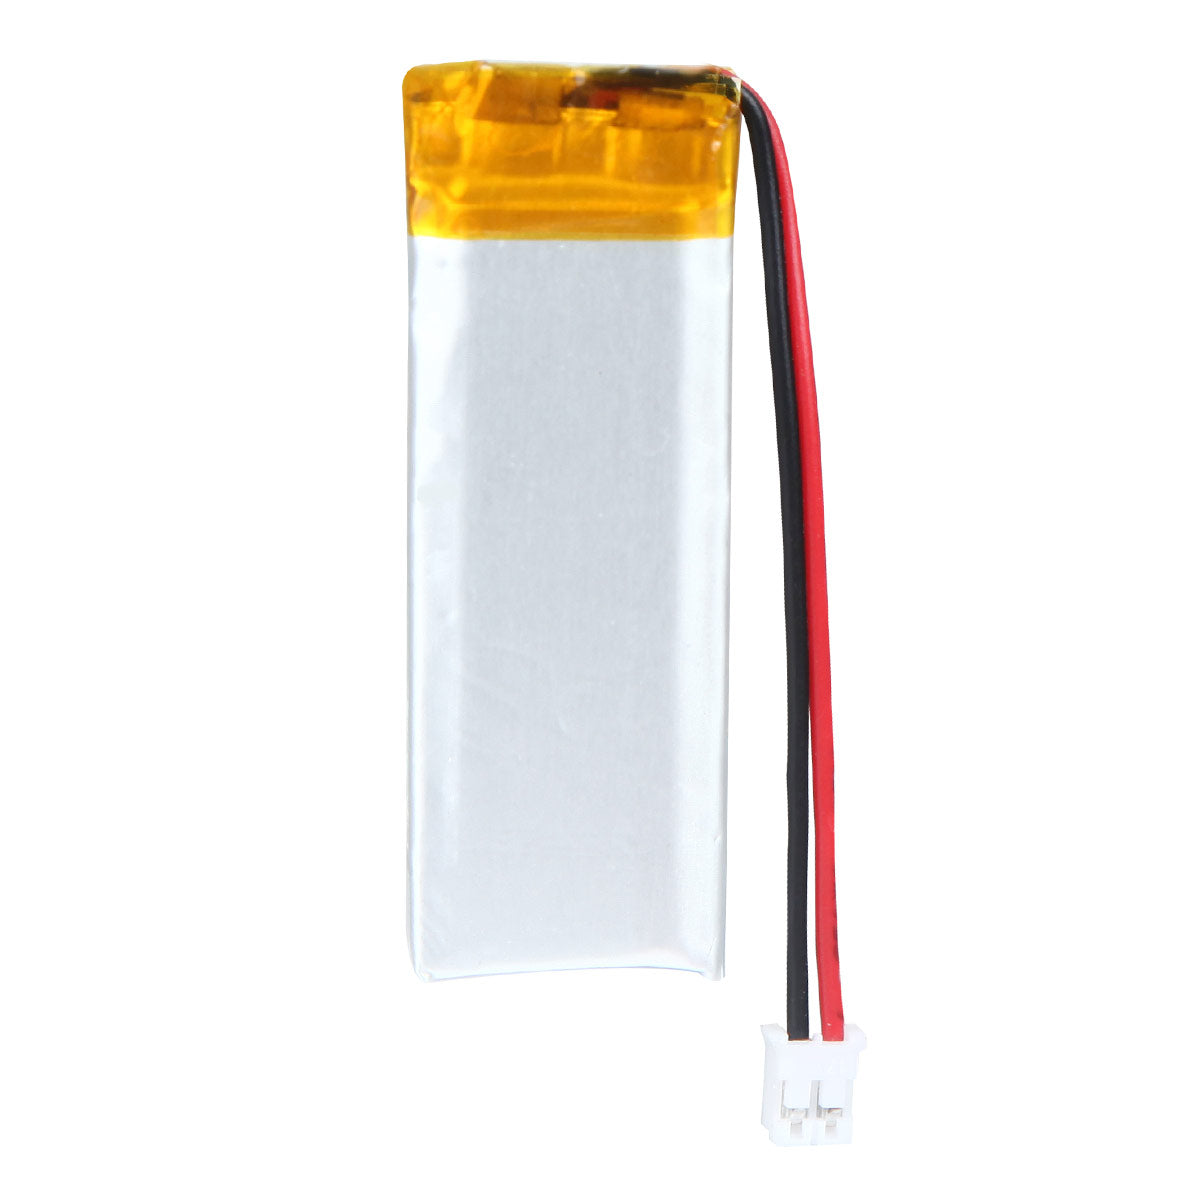 YDL 3.7V 350mAh 601744 Rechargeable Lithium Polymer Battery